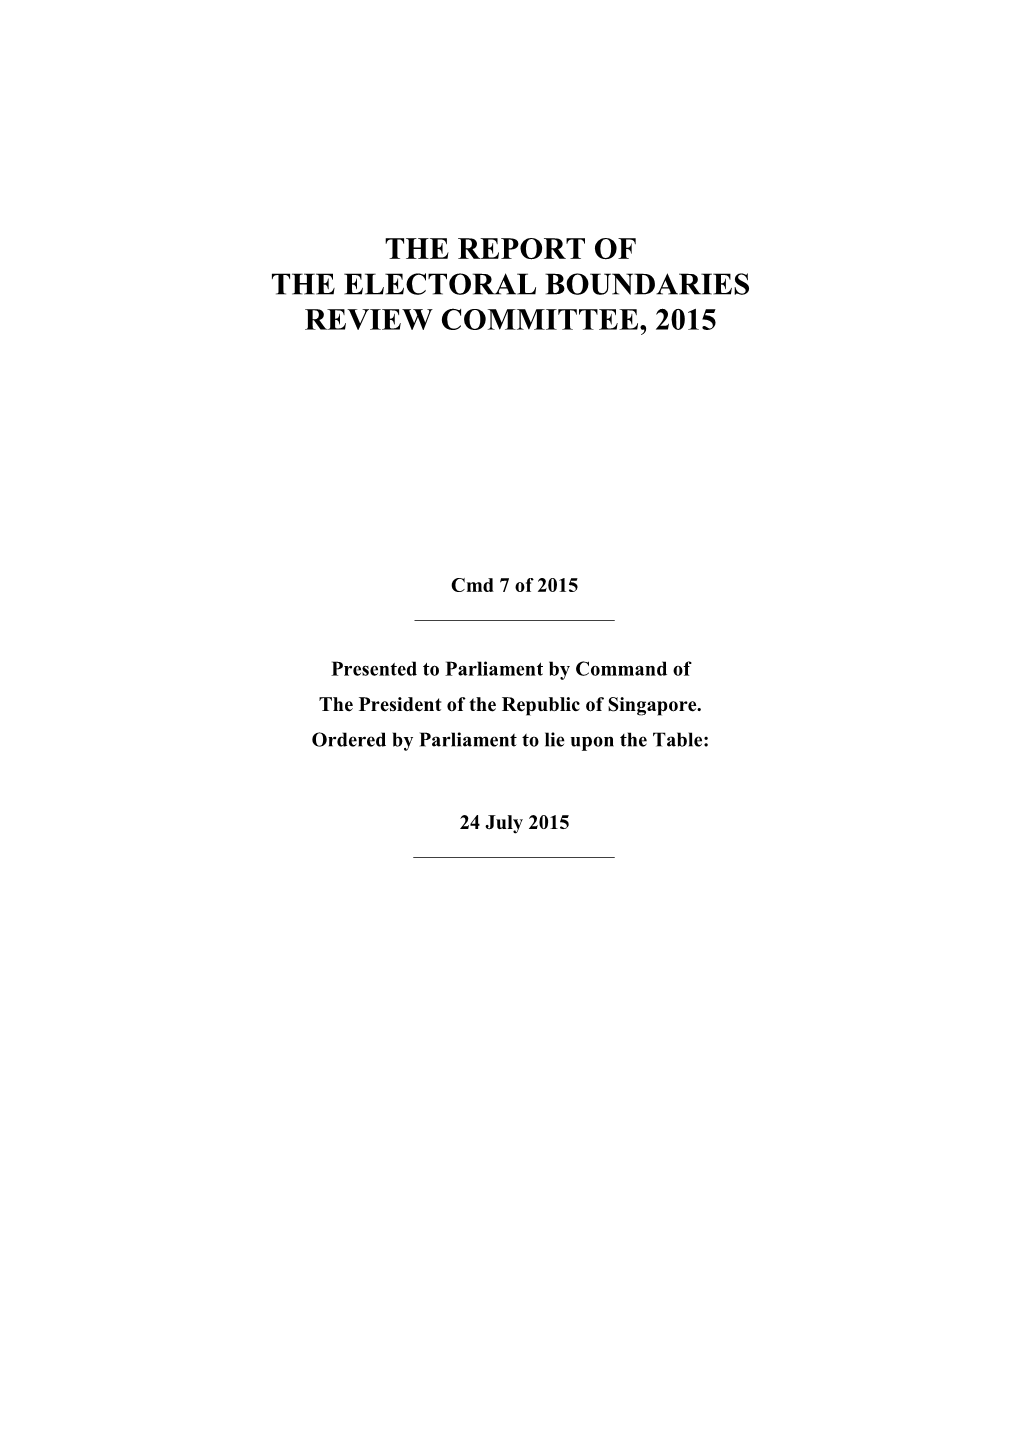 White Paper on the Report of the Electoral Boundaries Review Committee